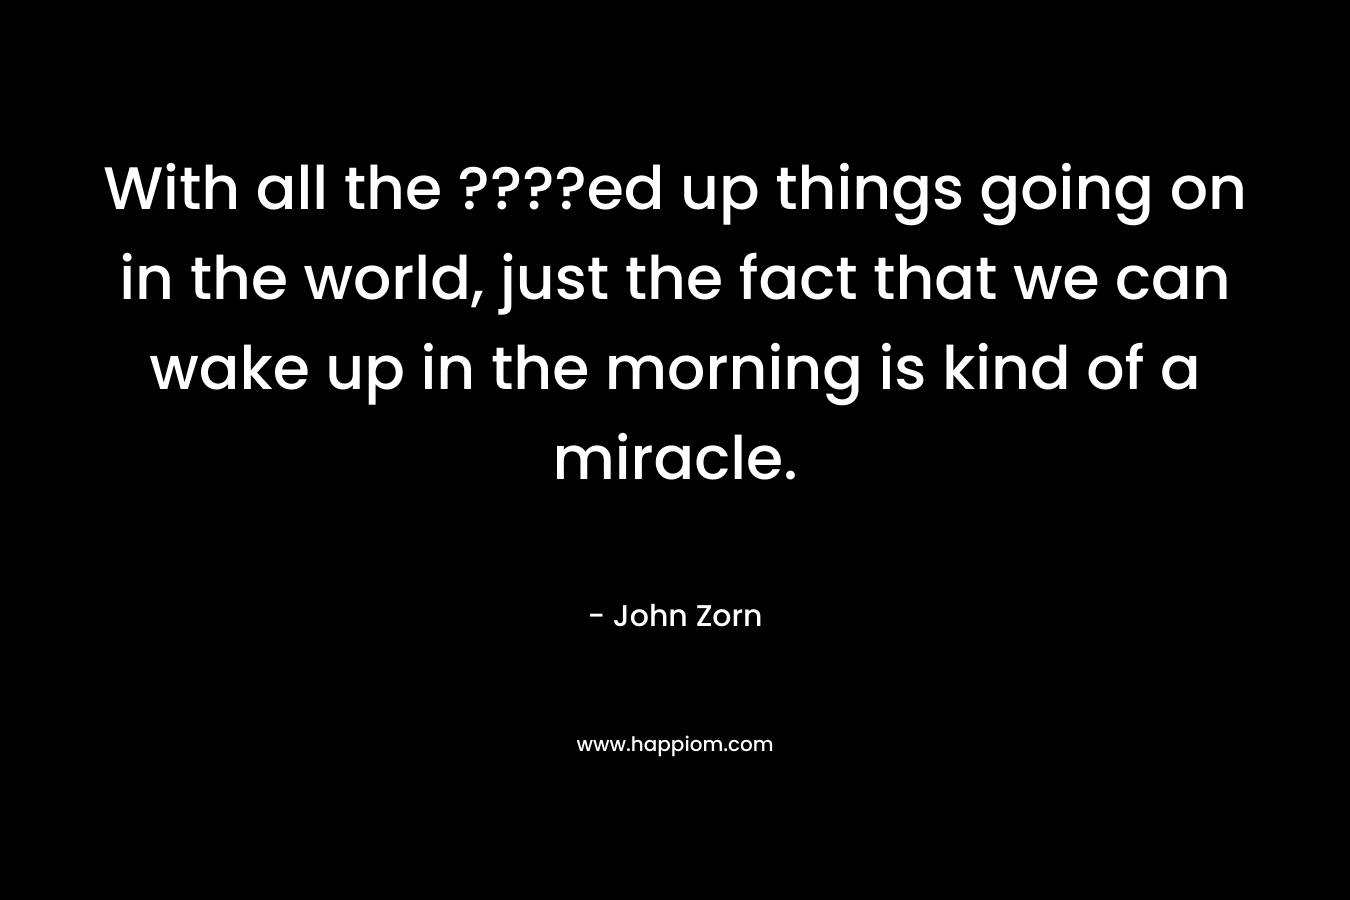 With all the ????ed up things going on in the world, just the fact that we can wake up in the morning is kind of a miracle. – John Zorn